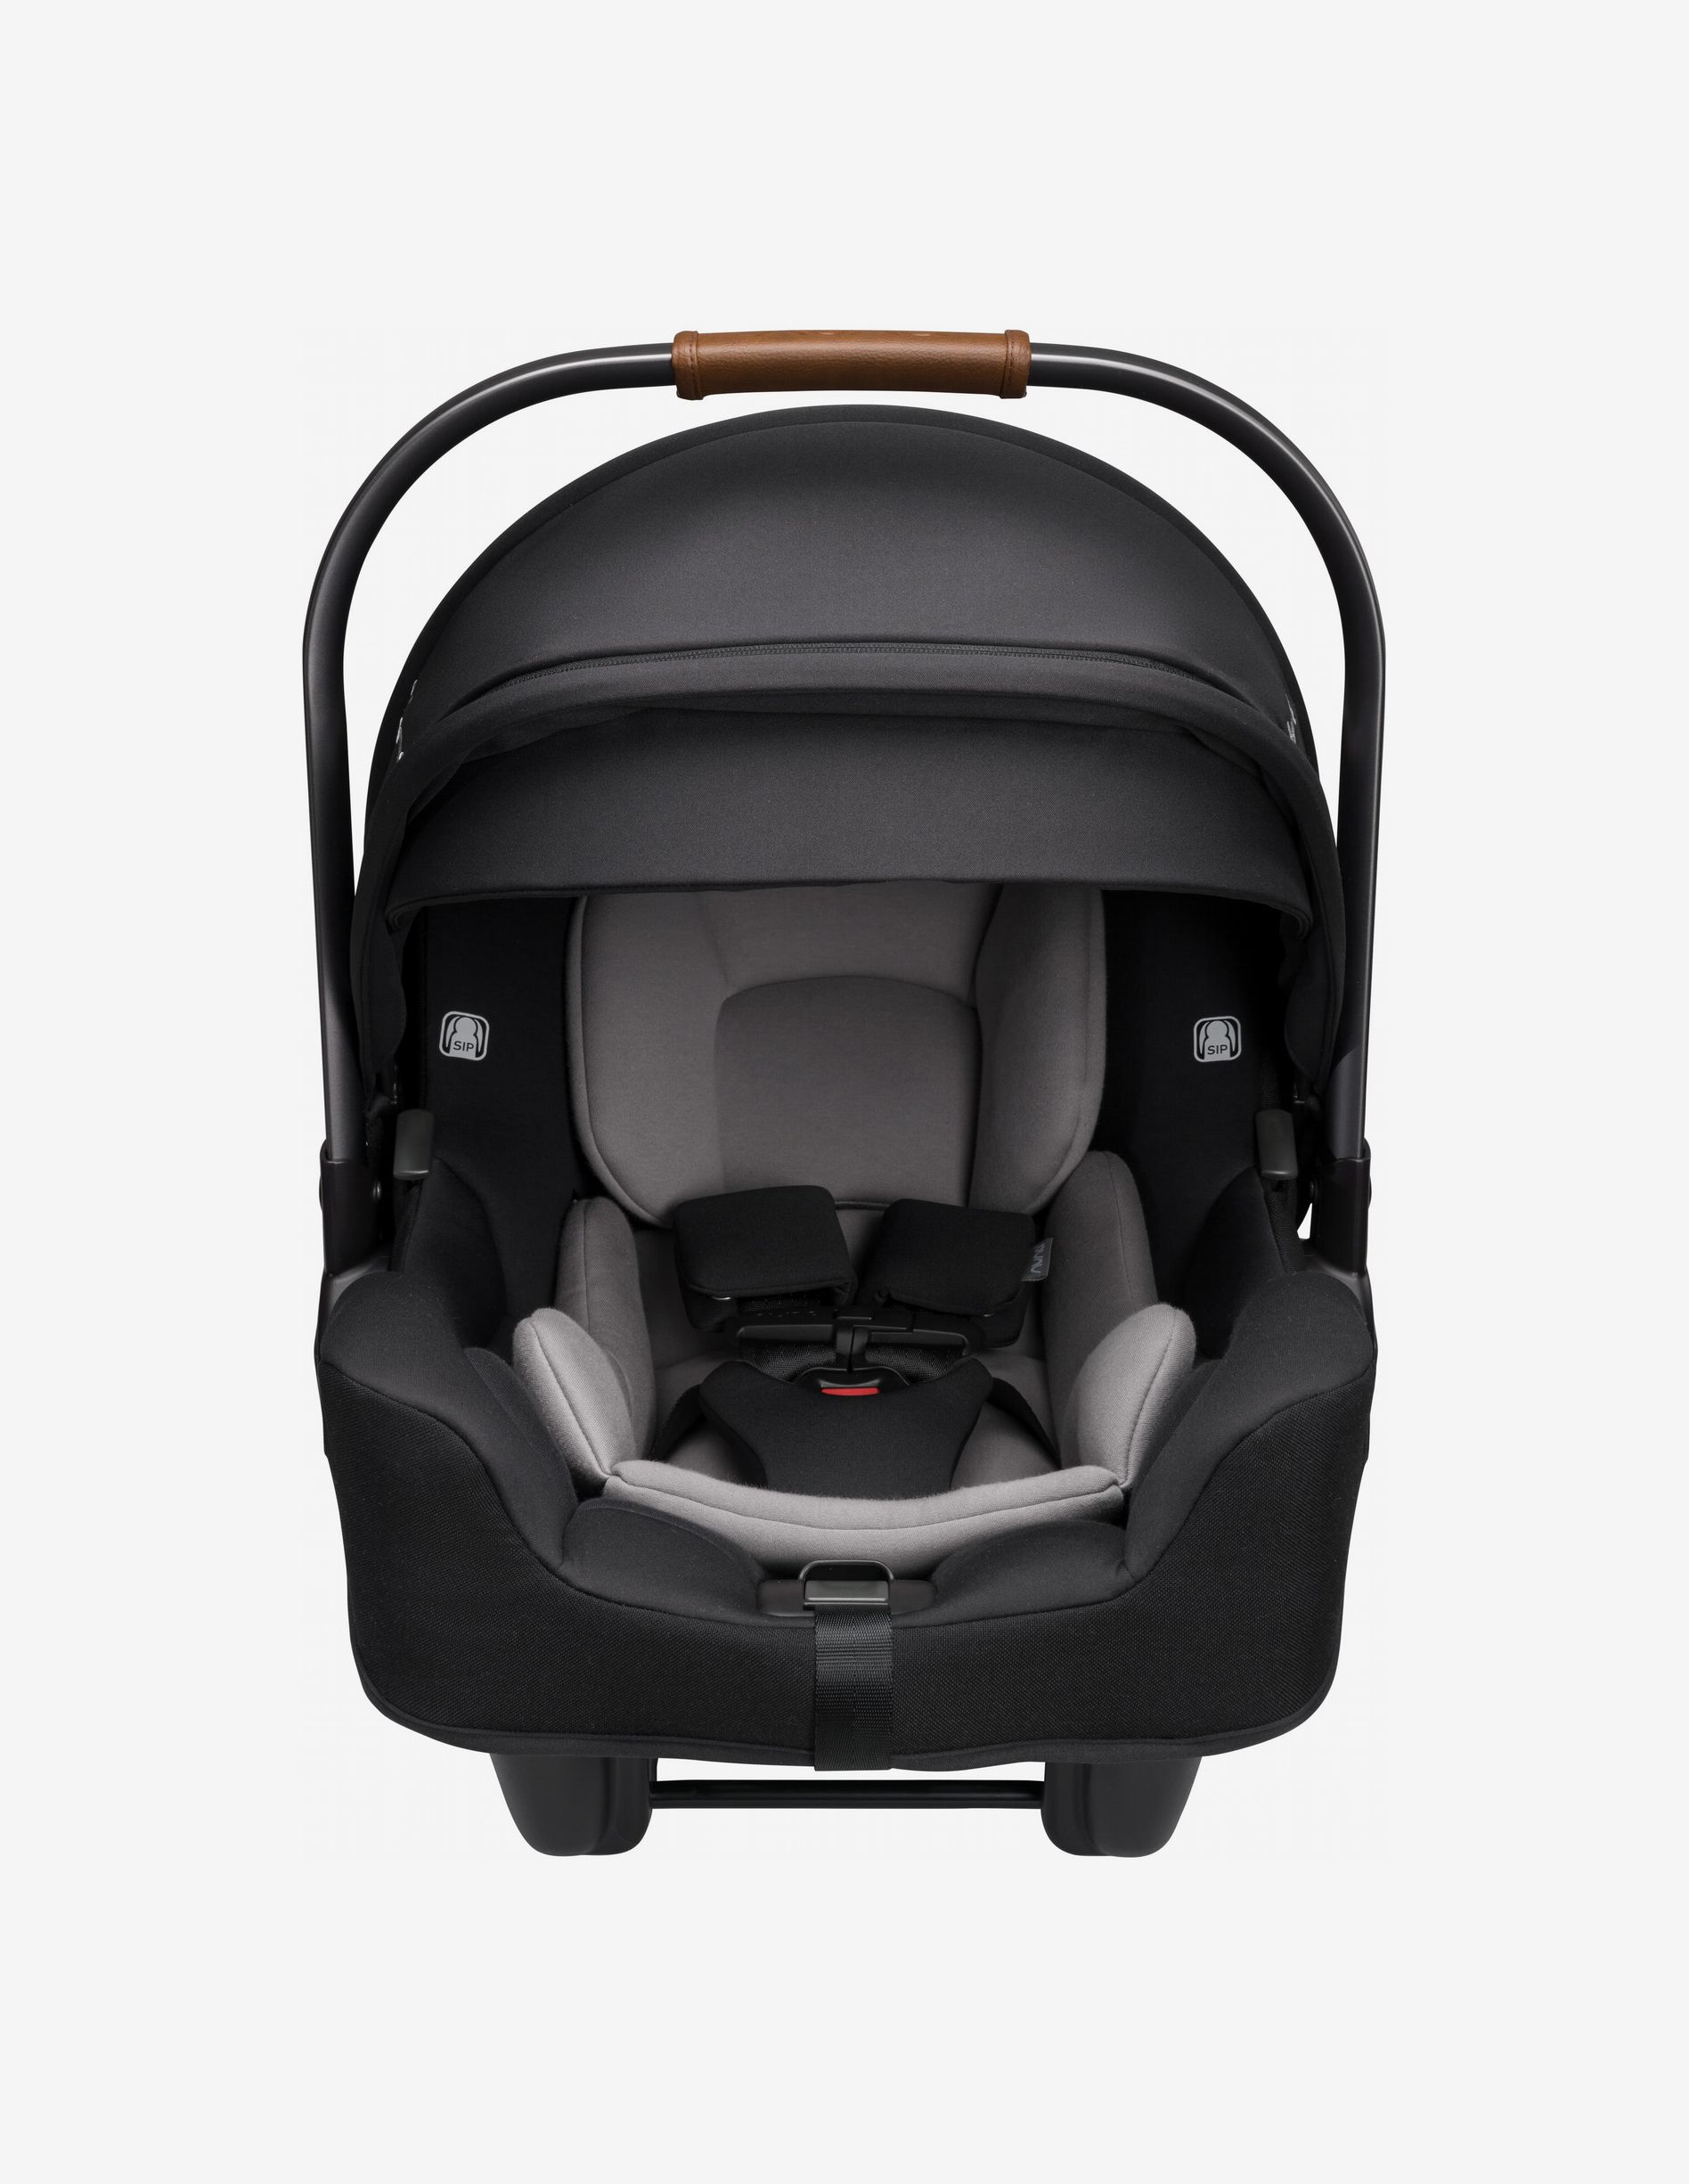 25 Best Infant Car Seats And Booster 2020 The Strategist - Best Rated Baby Car Seat 2020